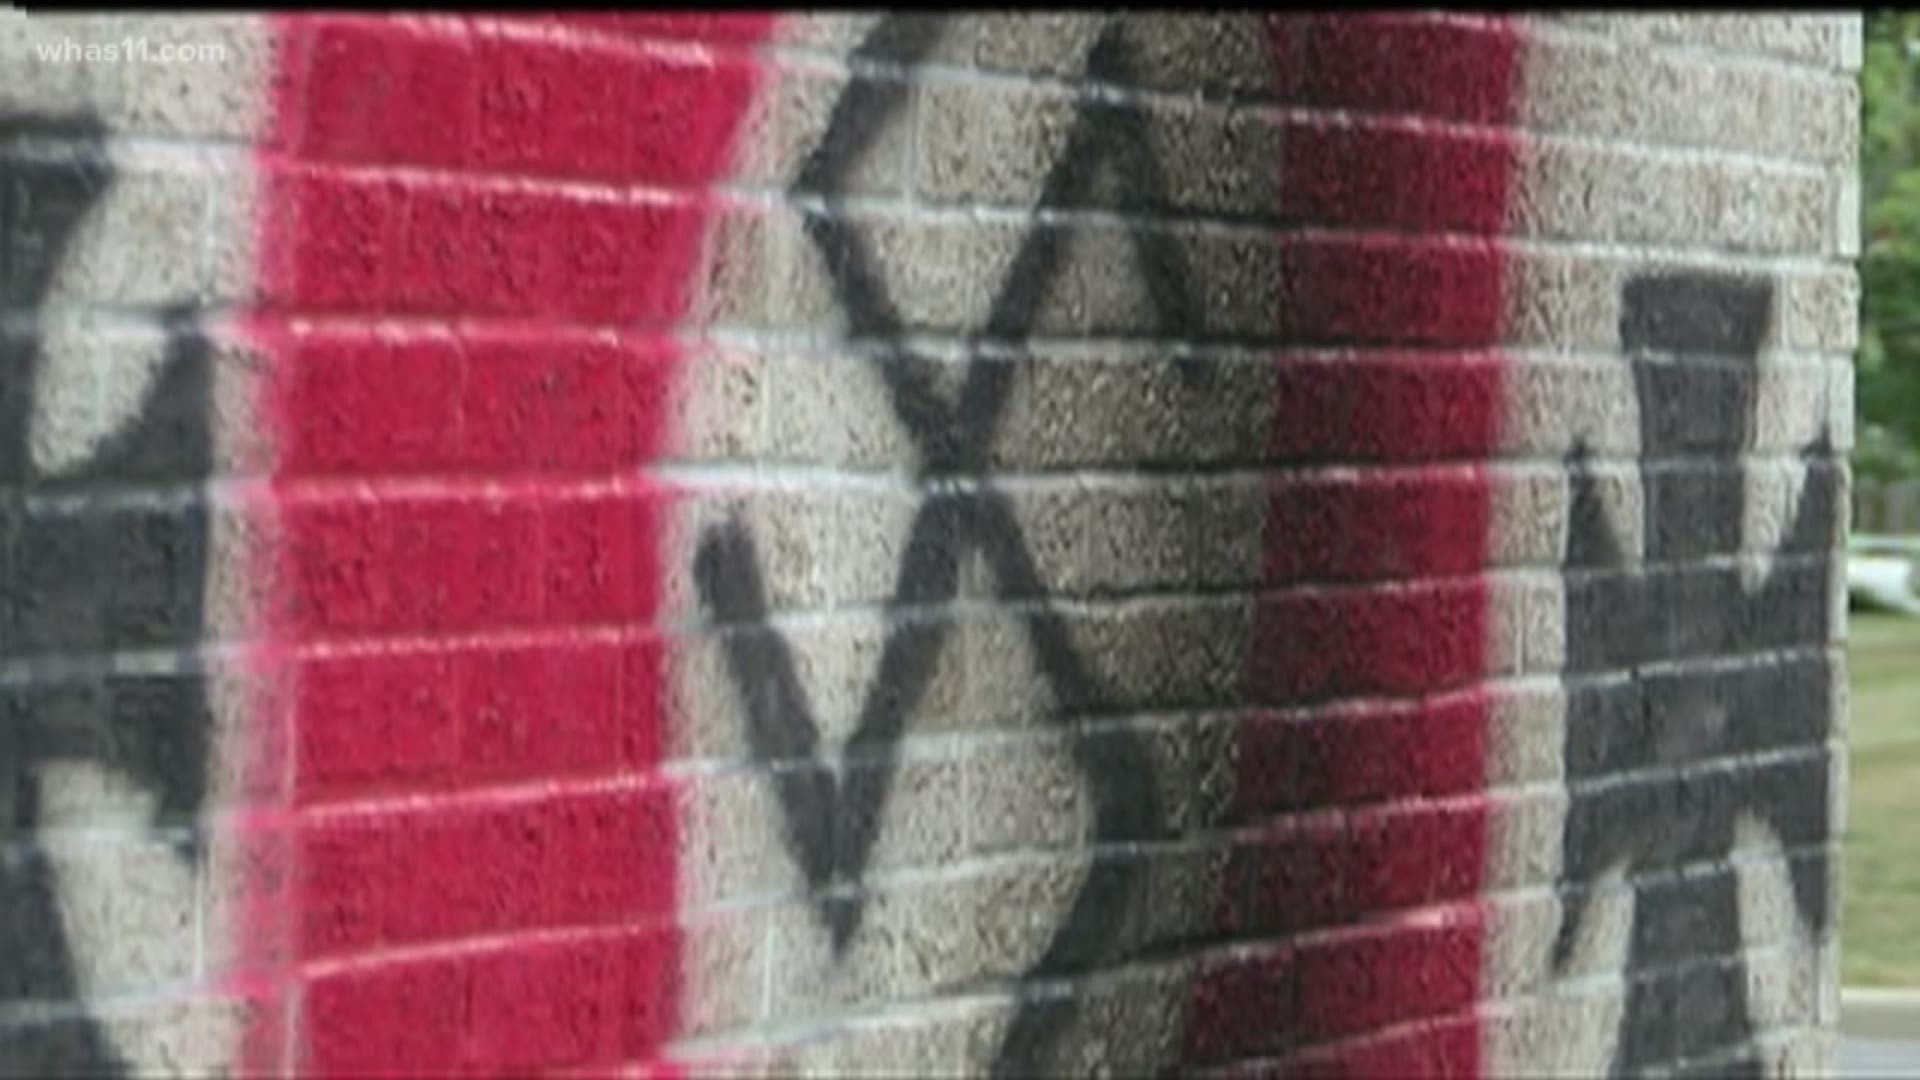 Authorities are trying to find those responsible after antisemitic graffiti was placed on an Indianapolis-area synagogue.